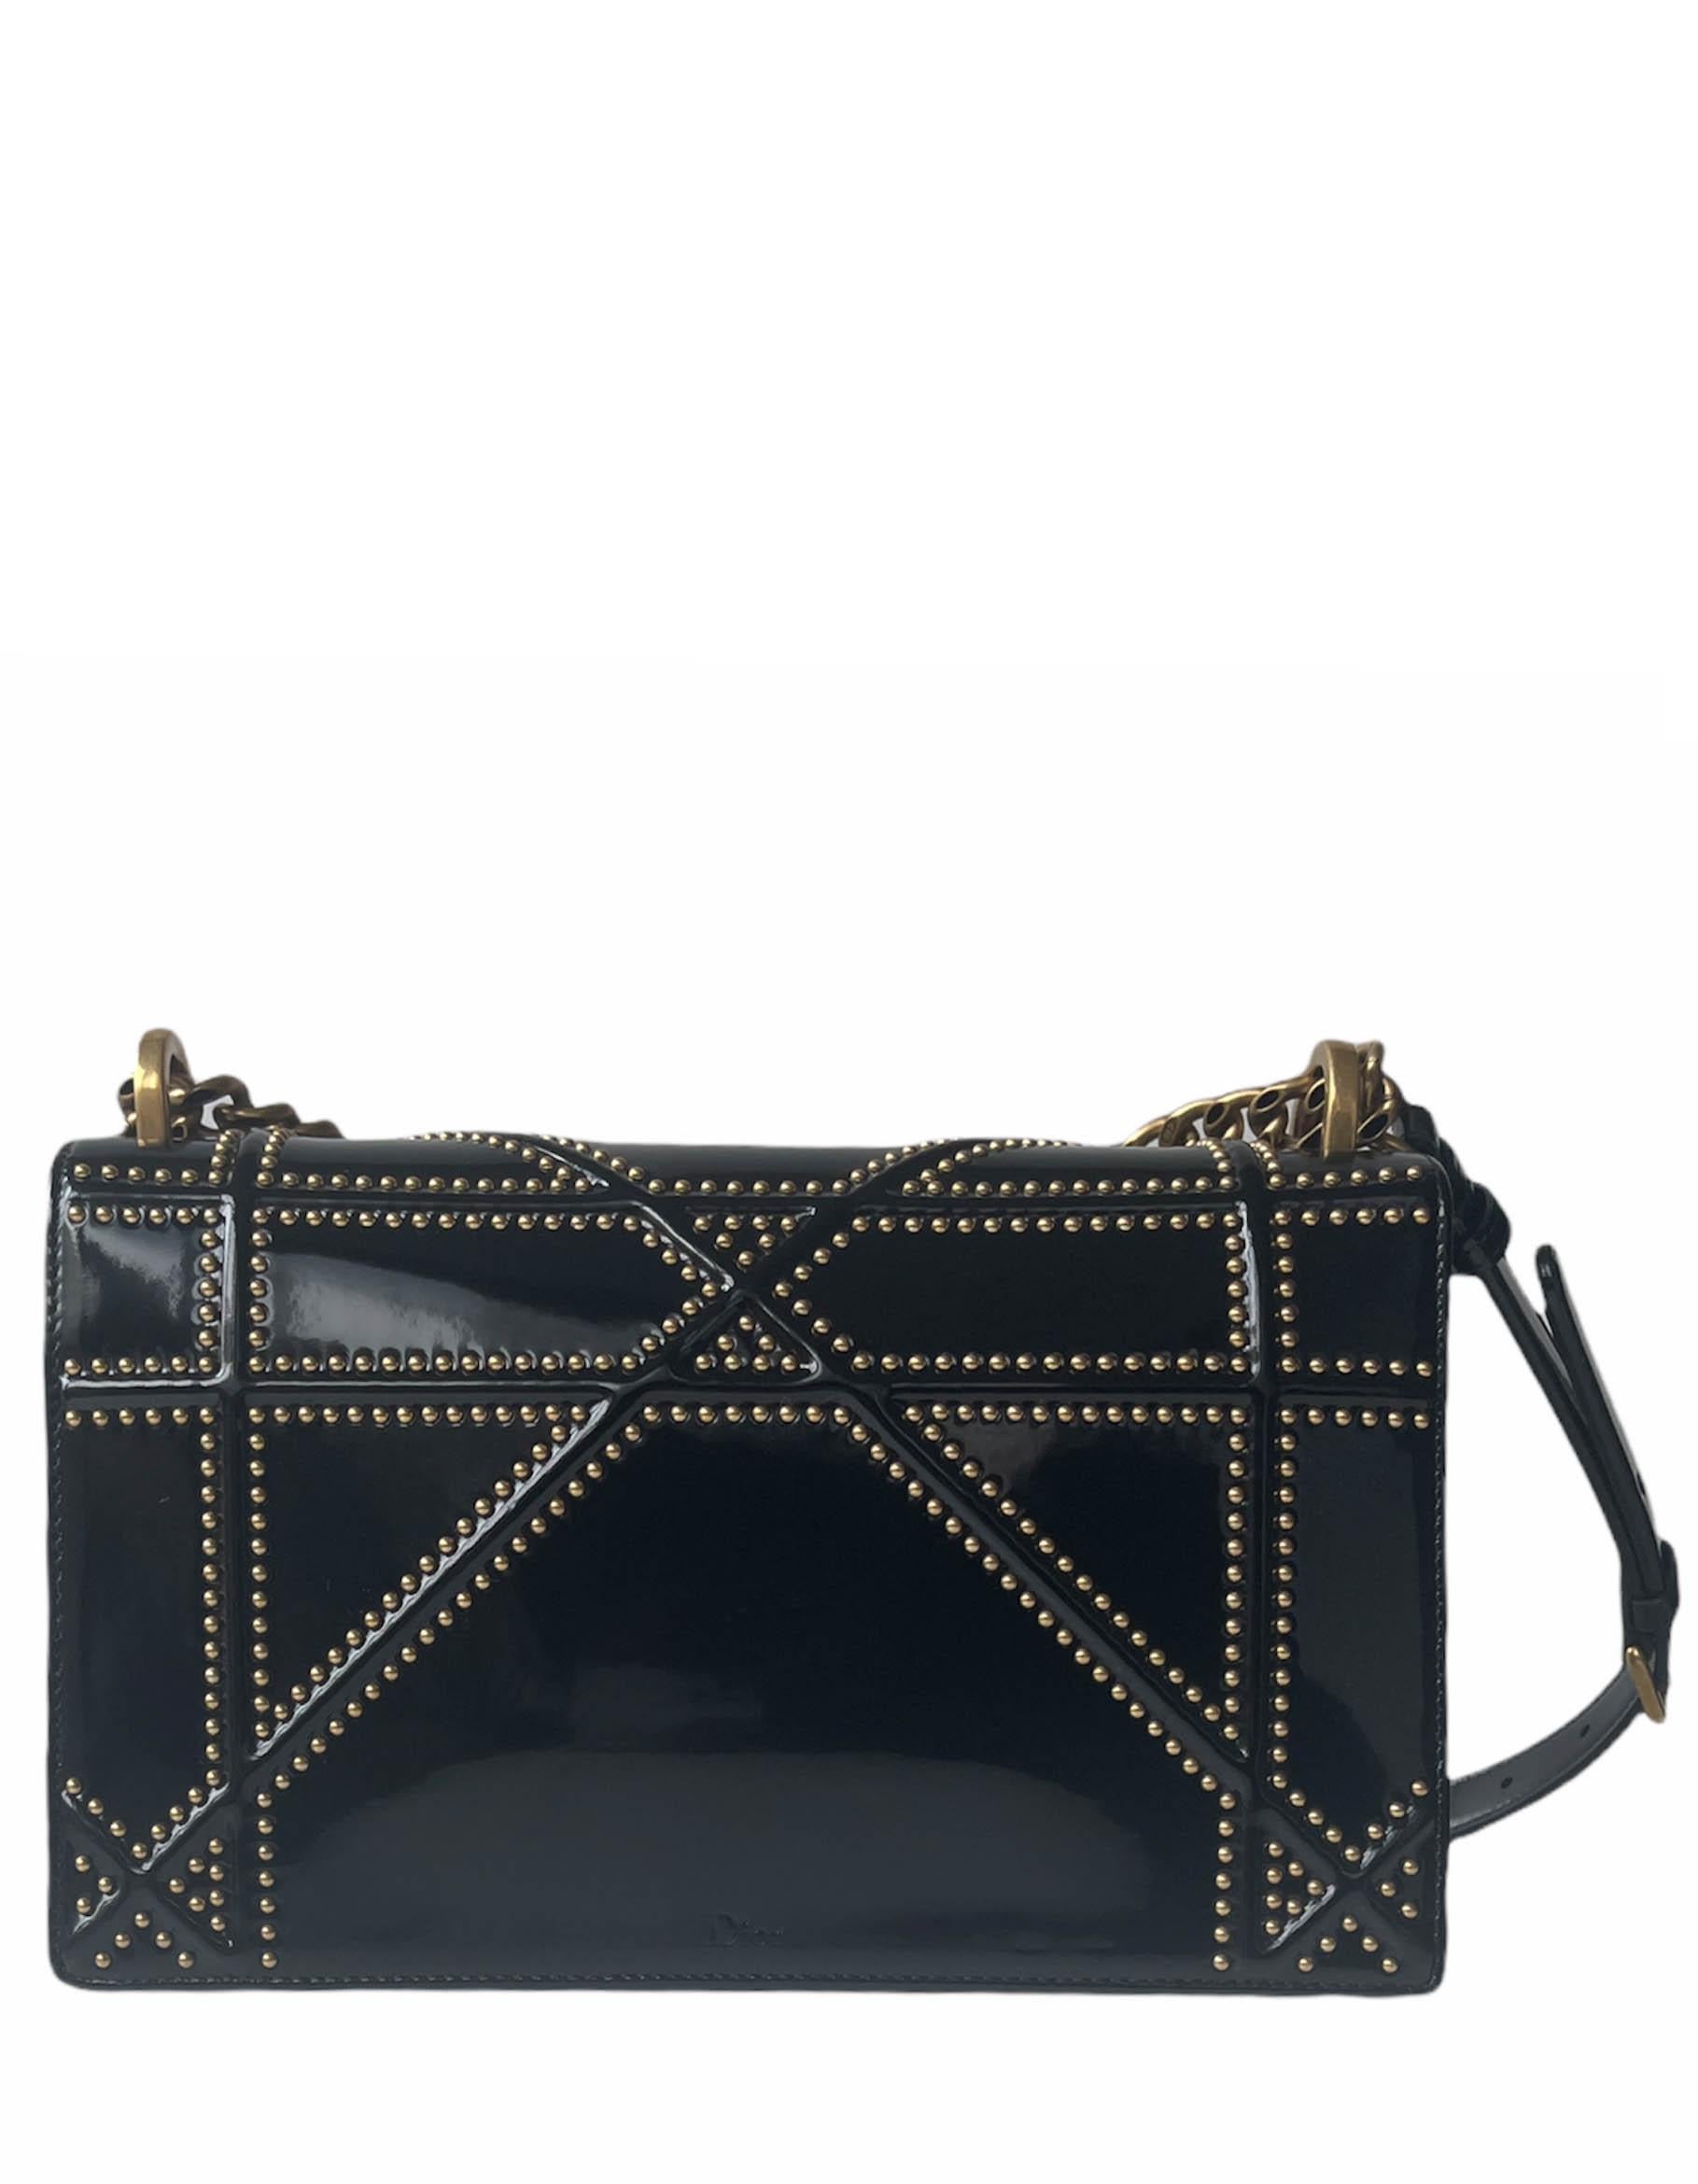 Dior Black Patent Leather Studded Medium Diorama Flap Bag

Made In: Italy
Year of Production: 2017
Color: Black
Hardware: Goldtone
Materials: Patent leather and metal
Closure/Opening: Flap top with push-lock
Exterior Pockets: None
Interior Pockets: